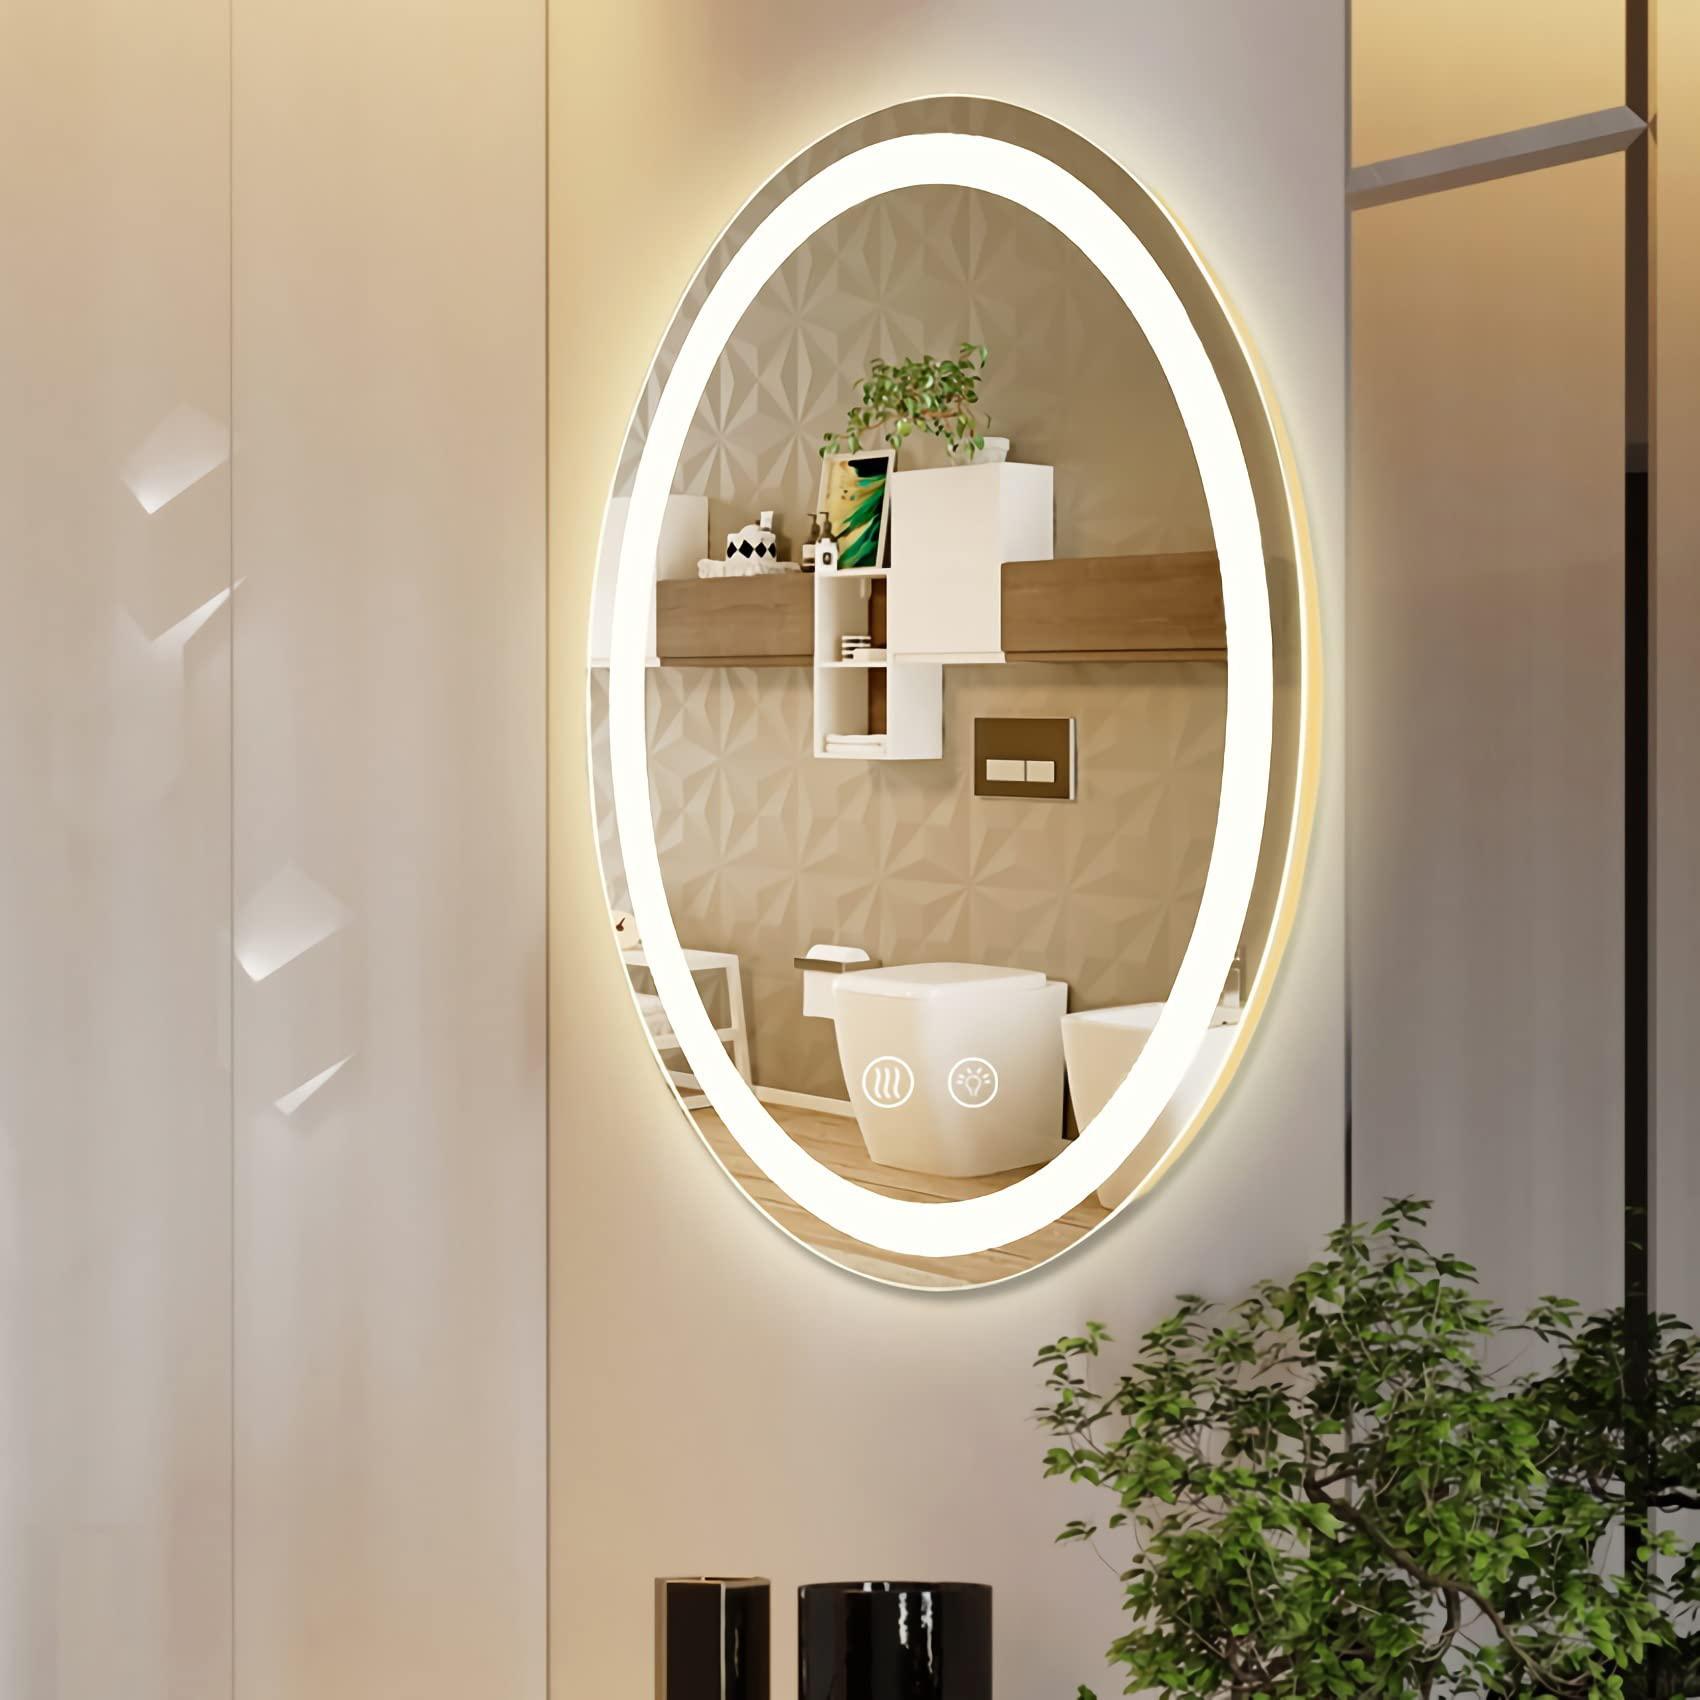 m ltmirror 23.6" x 31.5" led lighted oval bathroom vanity makeup mirrors with detachable magnifier, wall mounted anti-fog dim